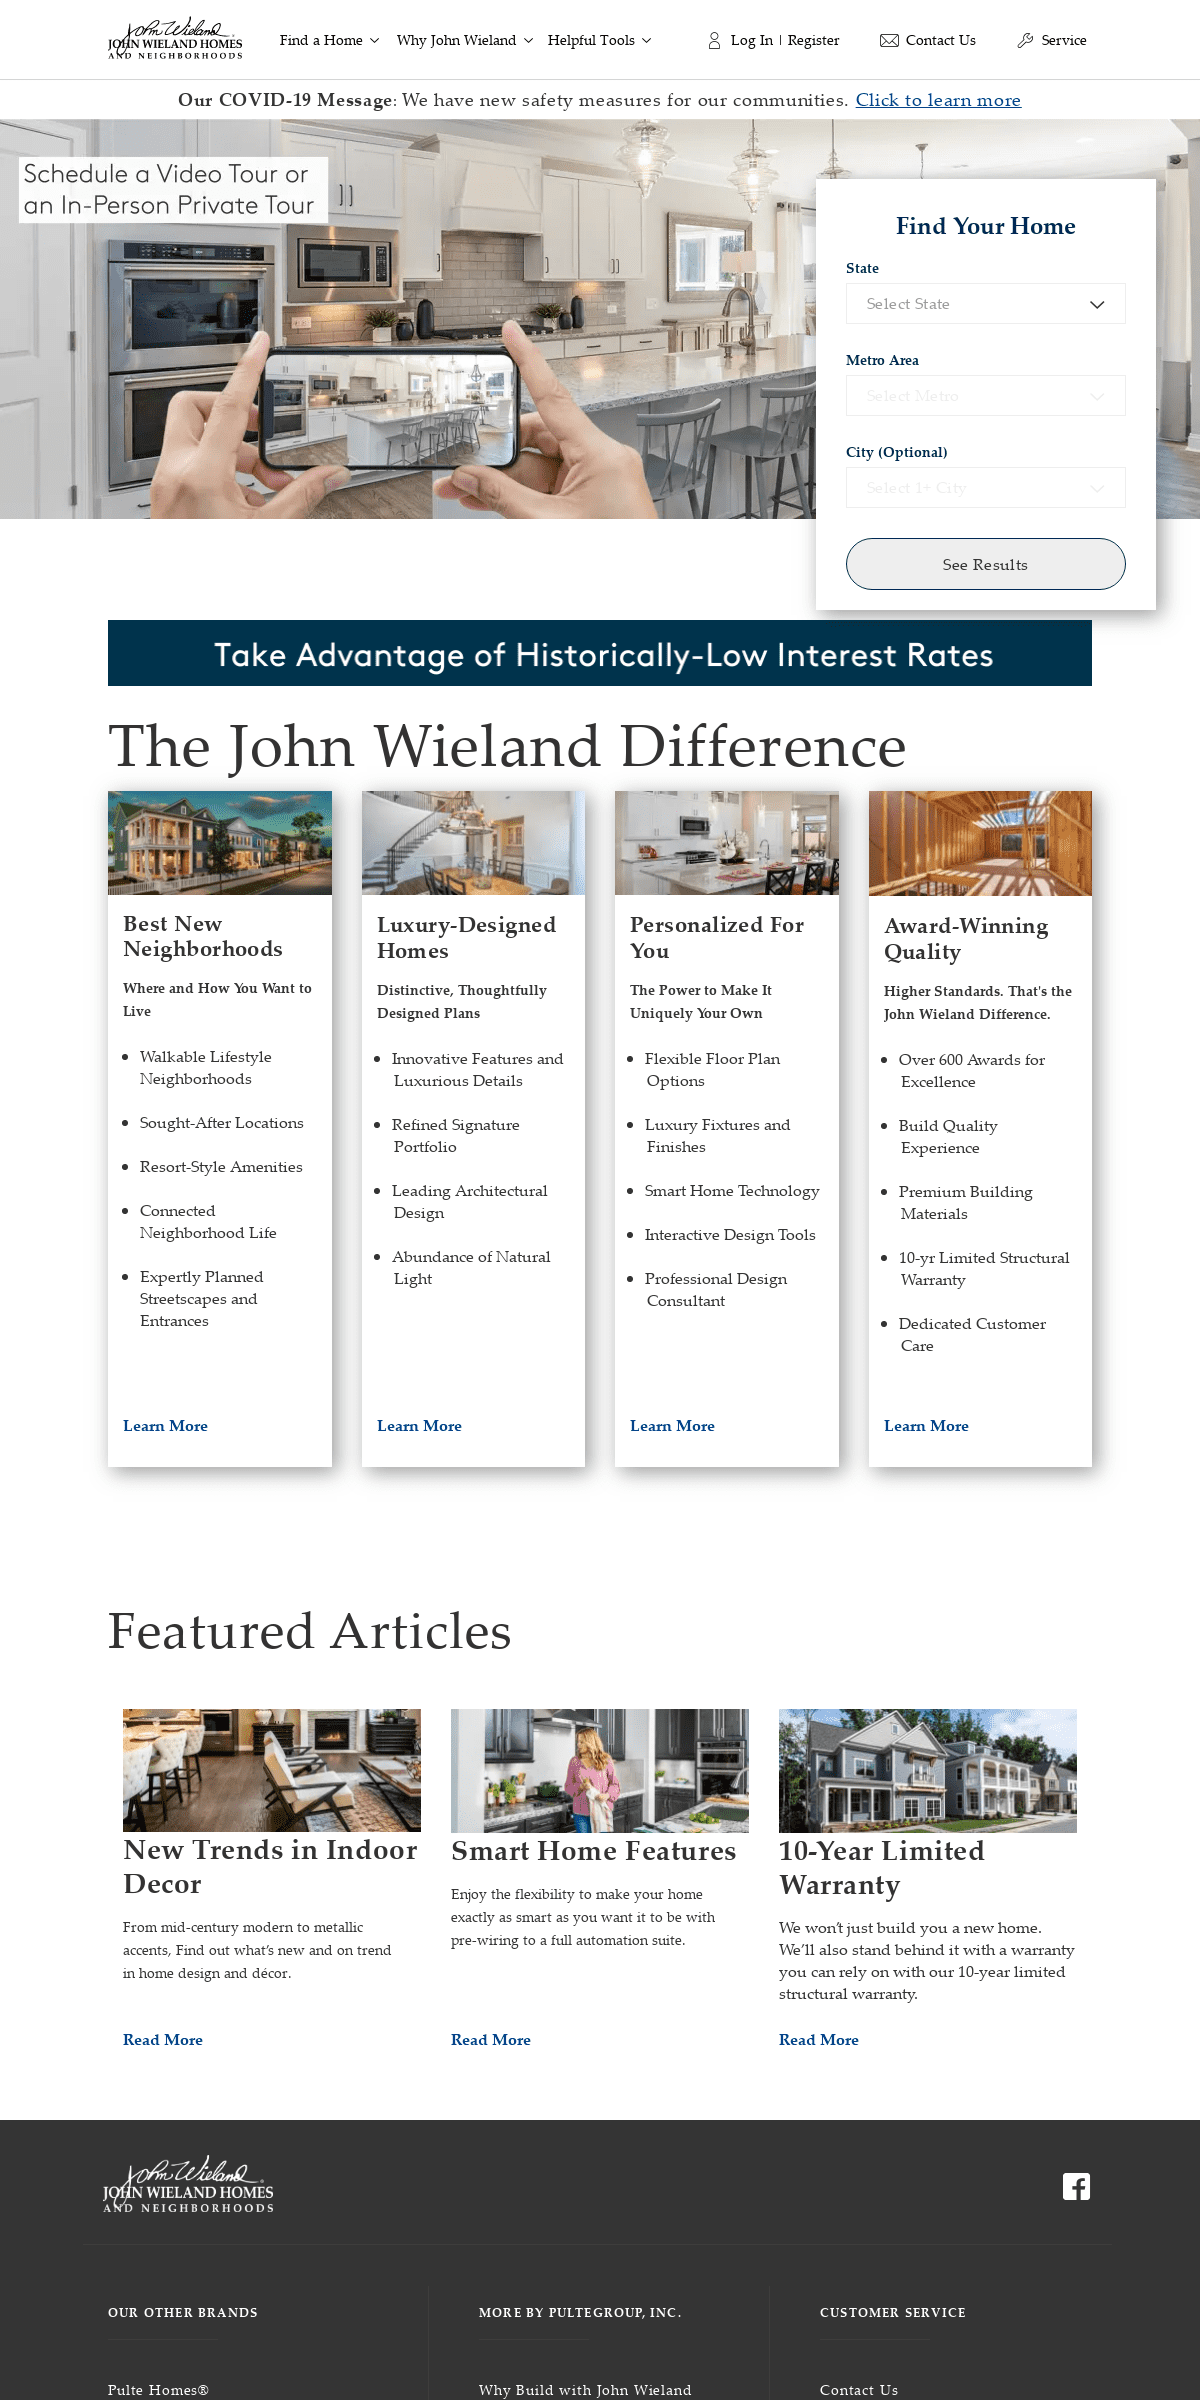 A complete backup of jwhomes.com